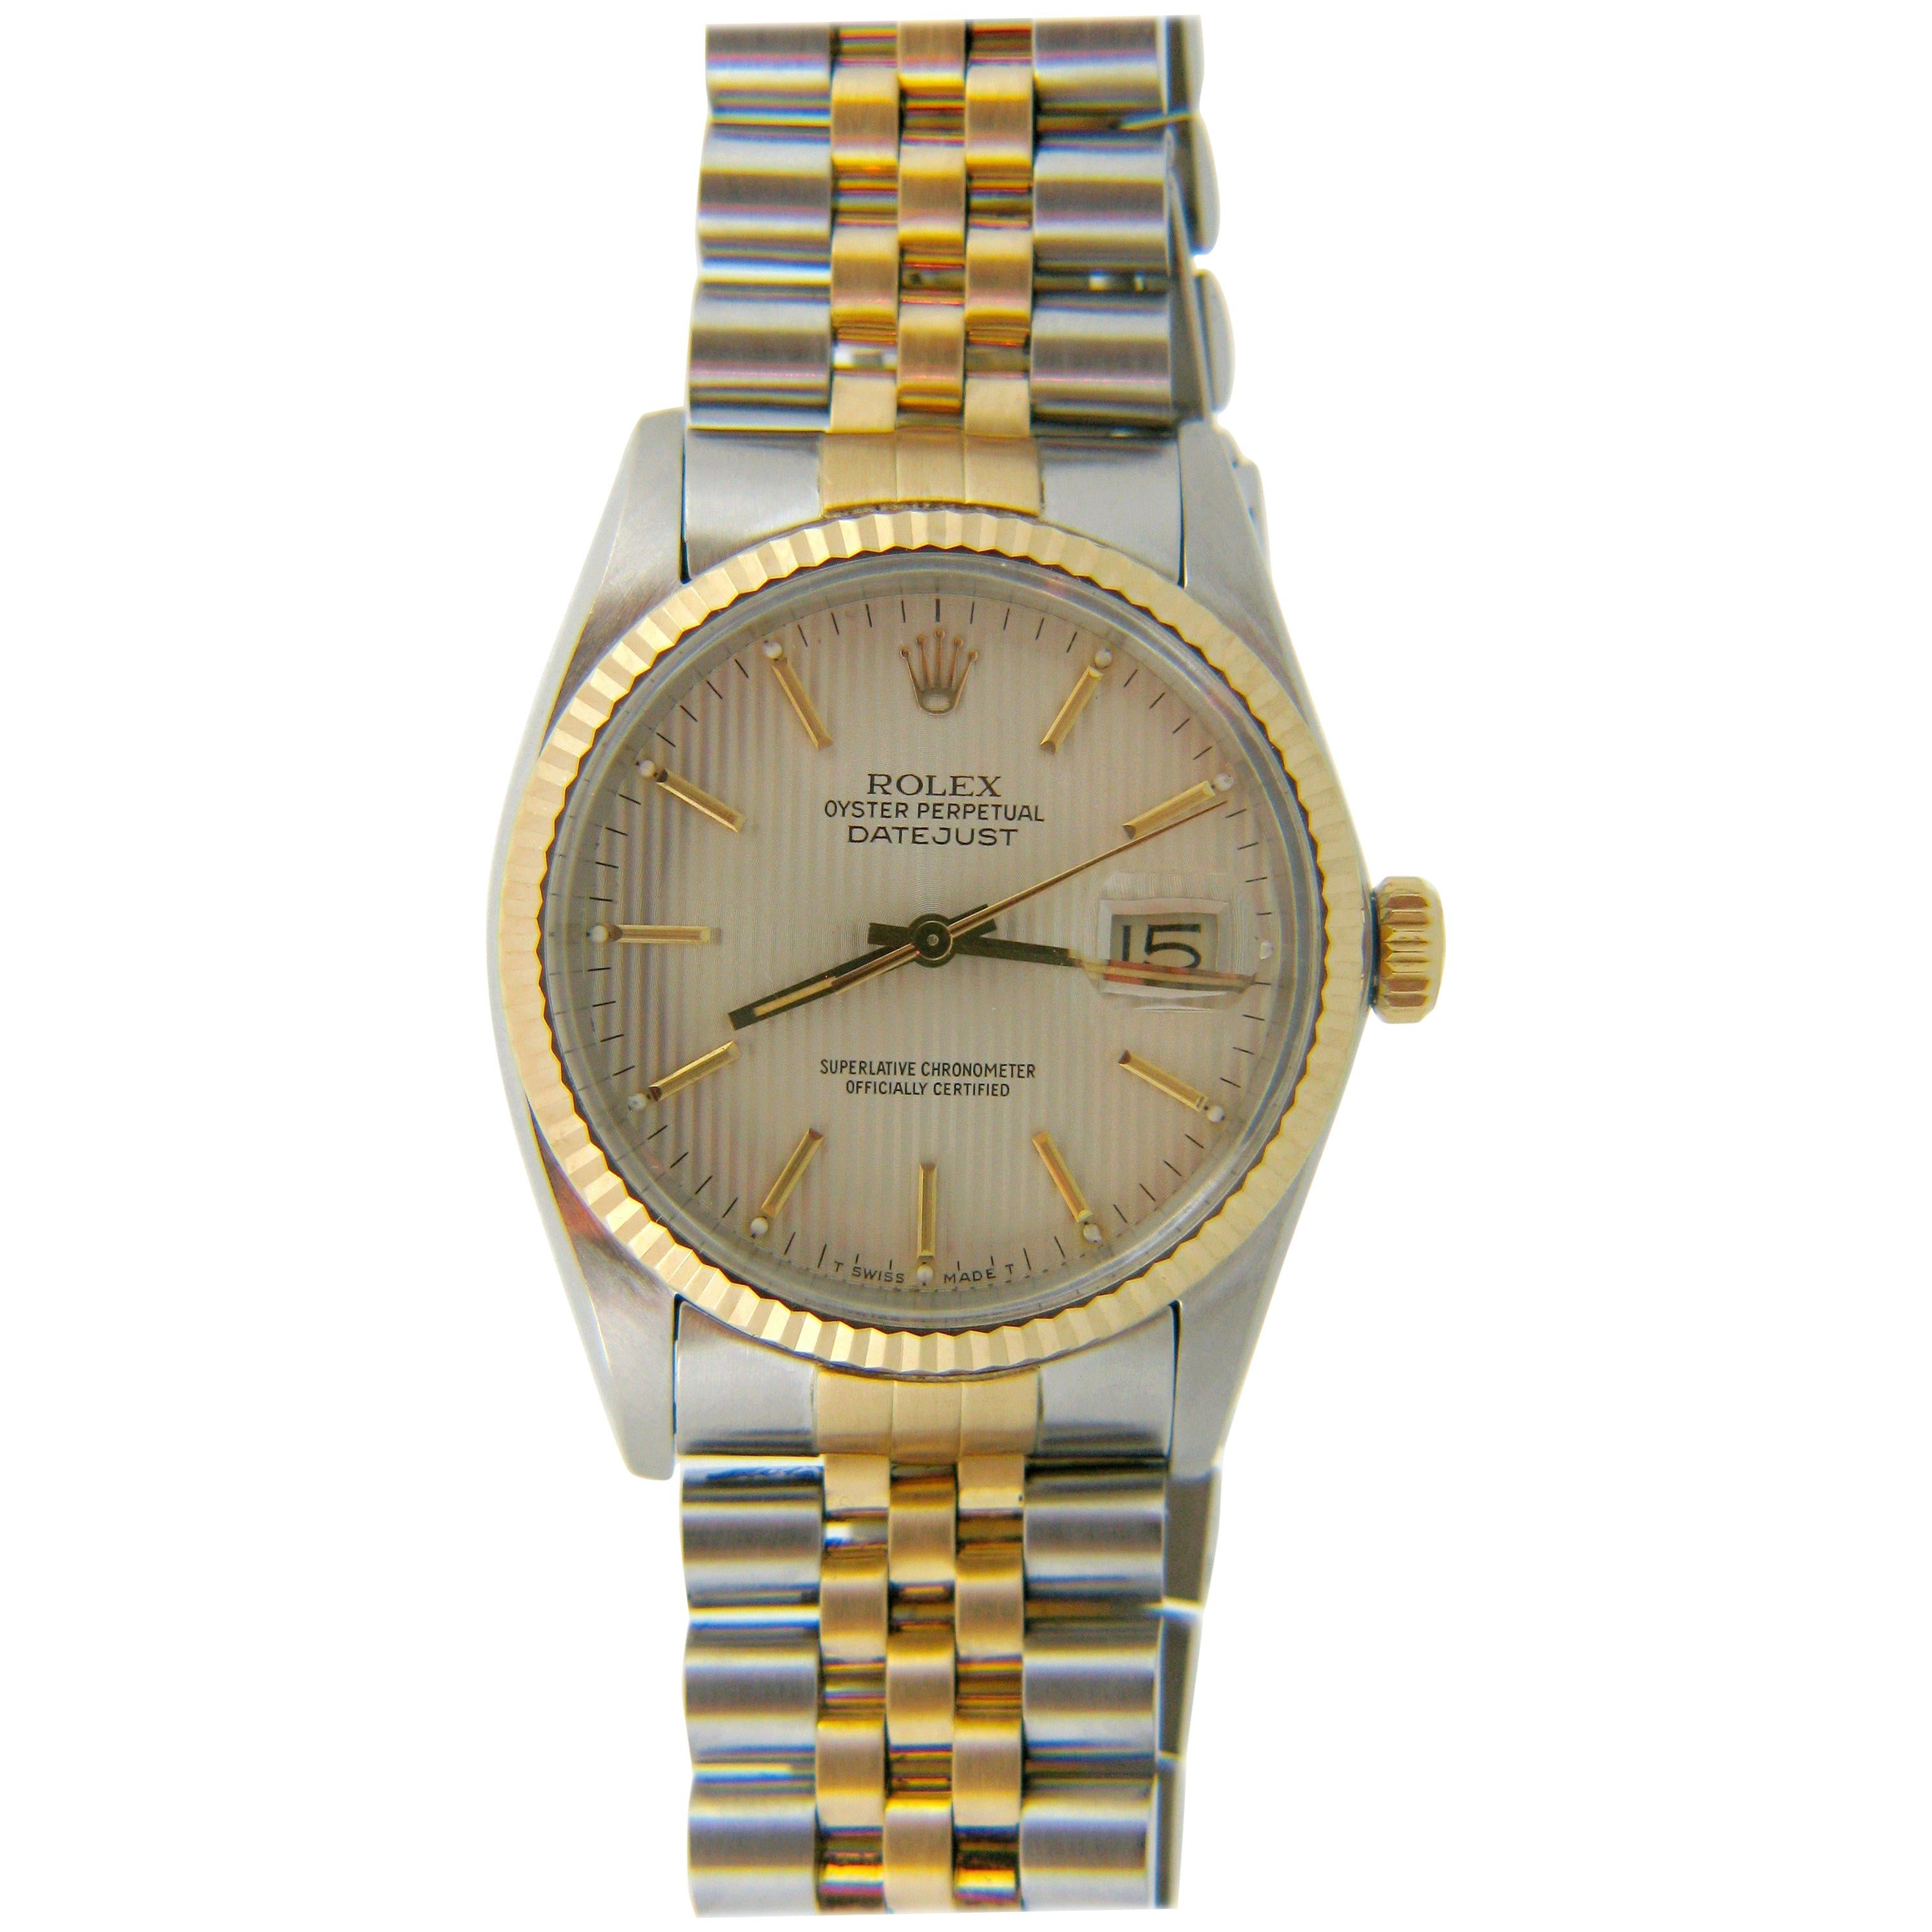 Rolex Oyster Perpetual Datejust 16000 Yellow Gold Stainless Steel Watch